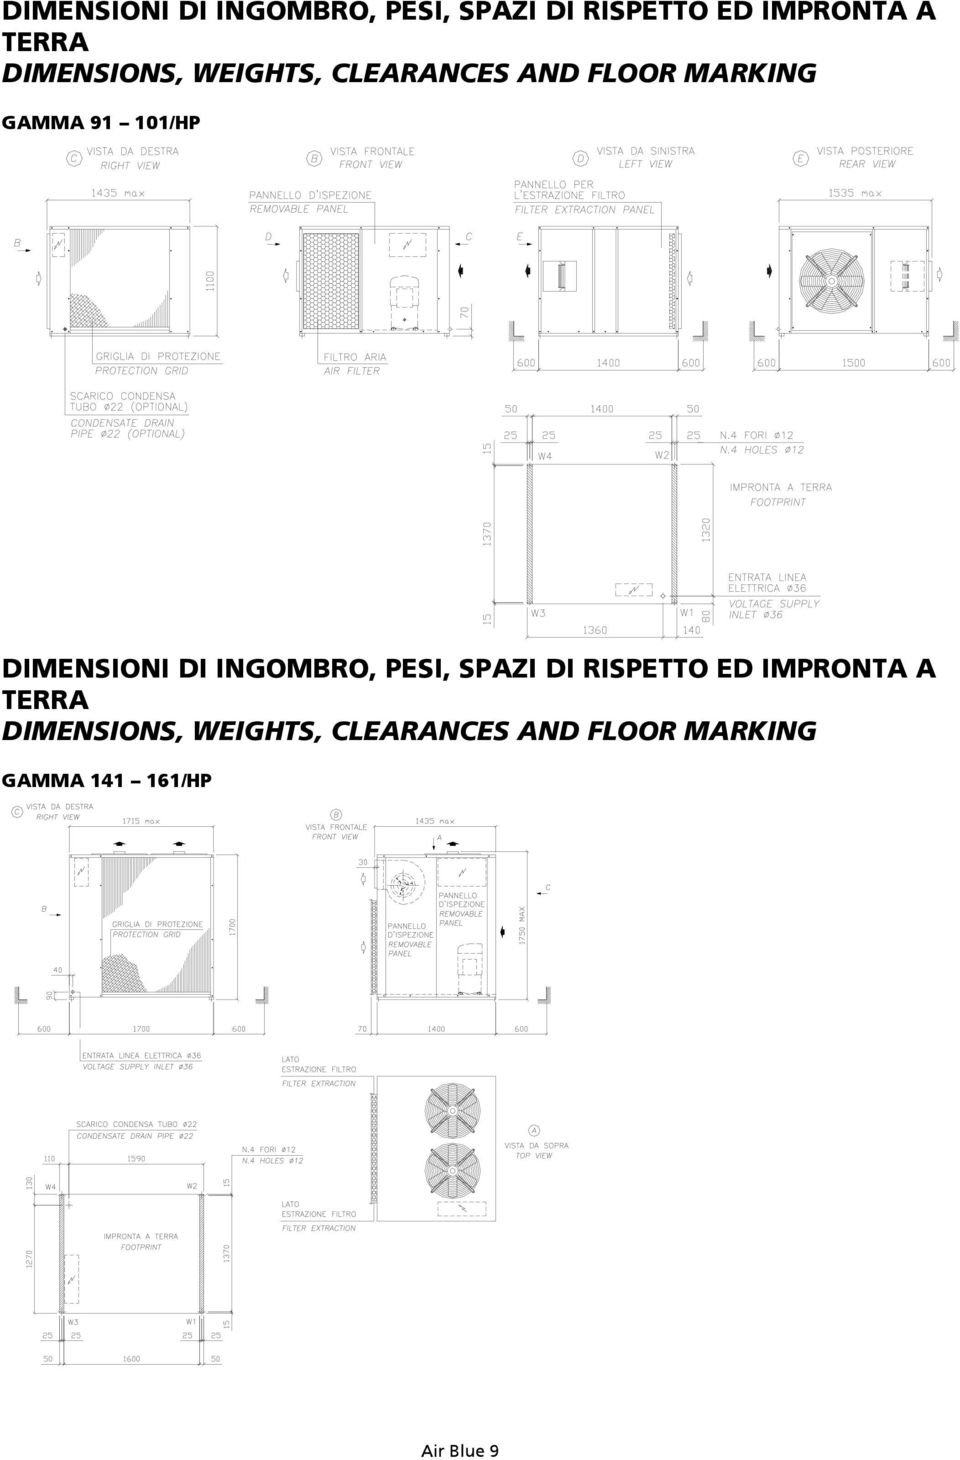 DIMENSIONS, WEIGHTS, CLEARANCES AND FLOOR MARKING GAMMA 141 161/HP